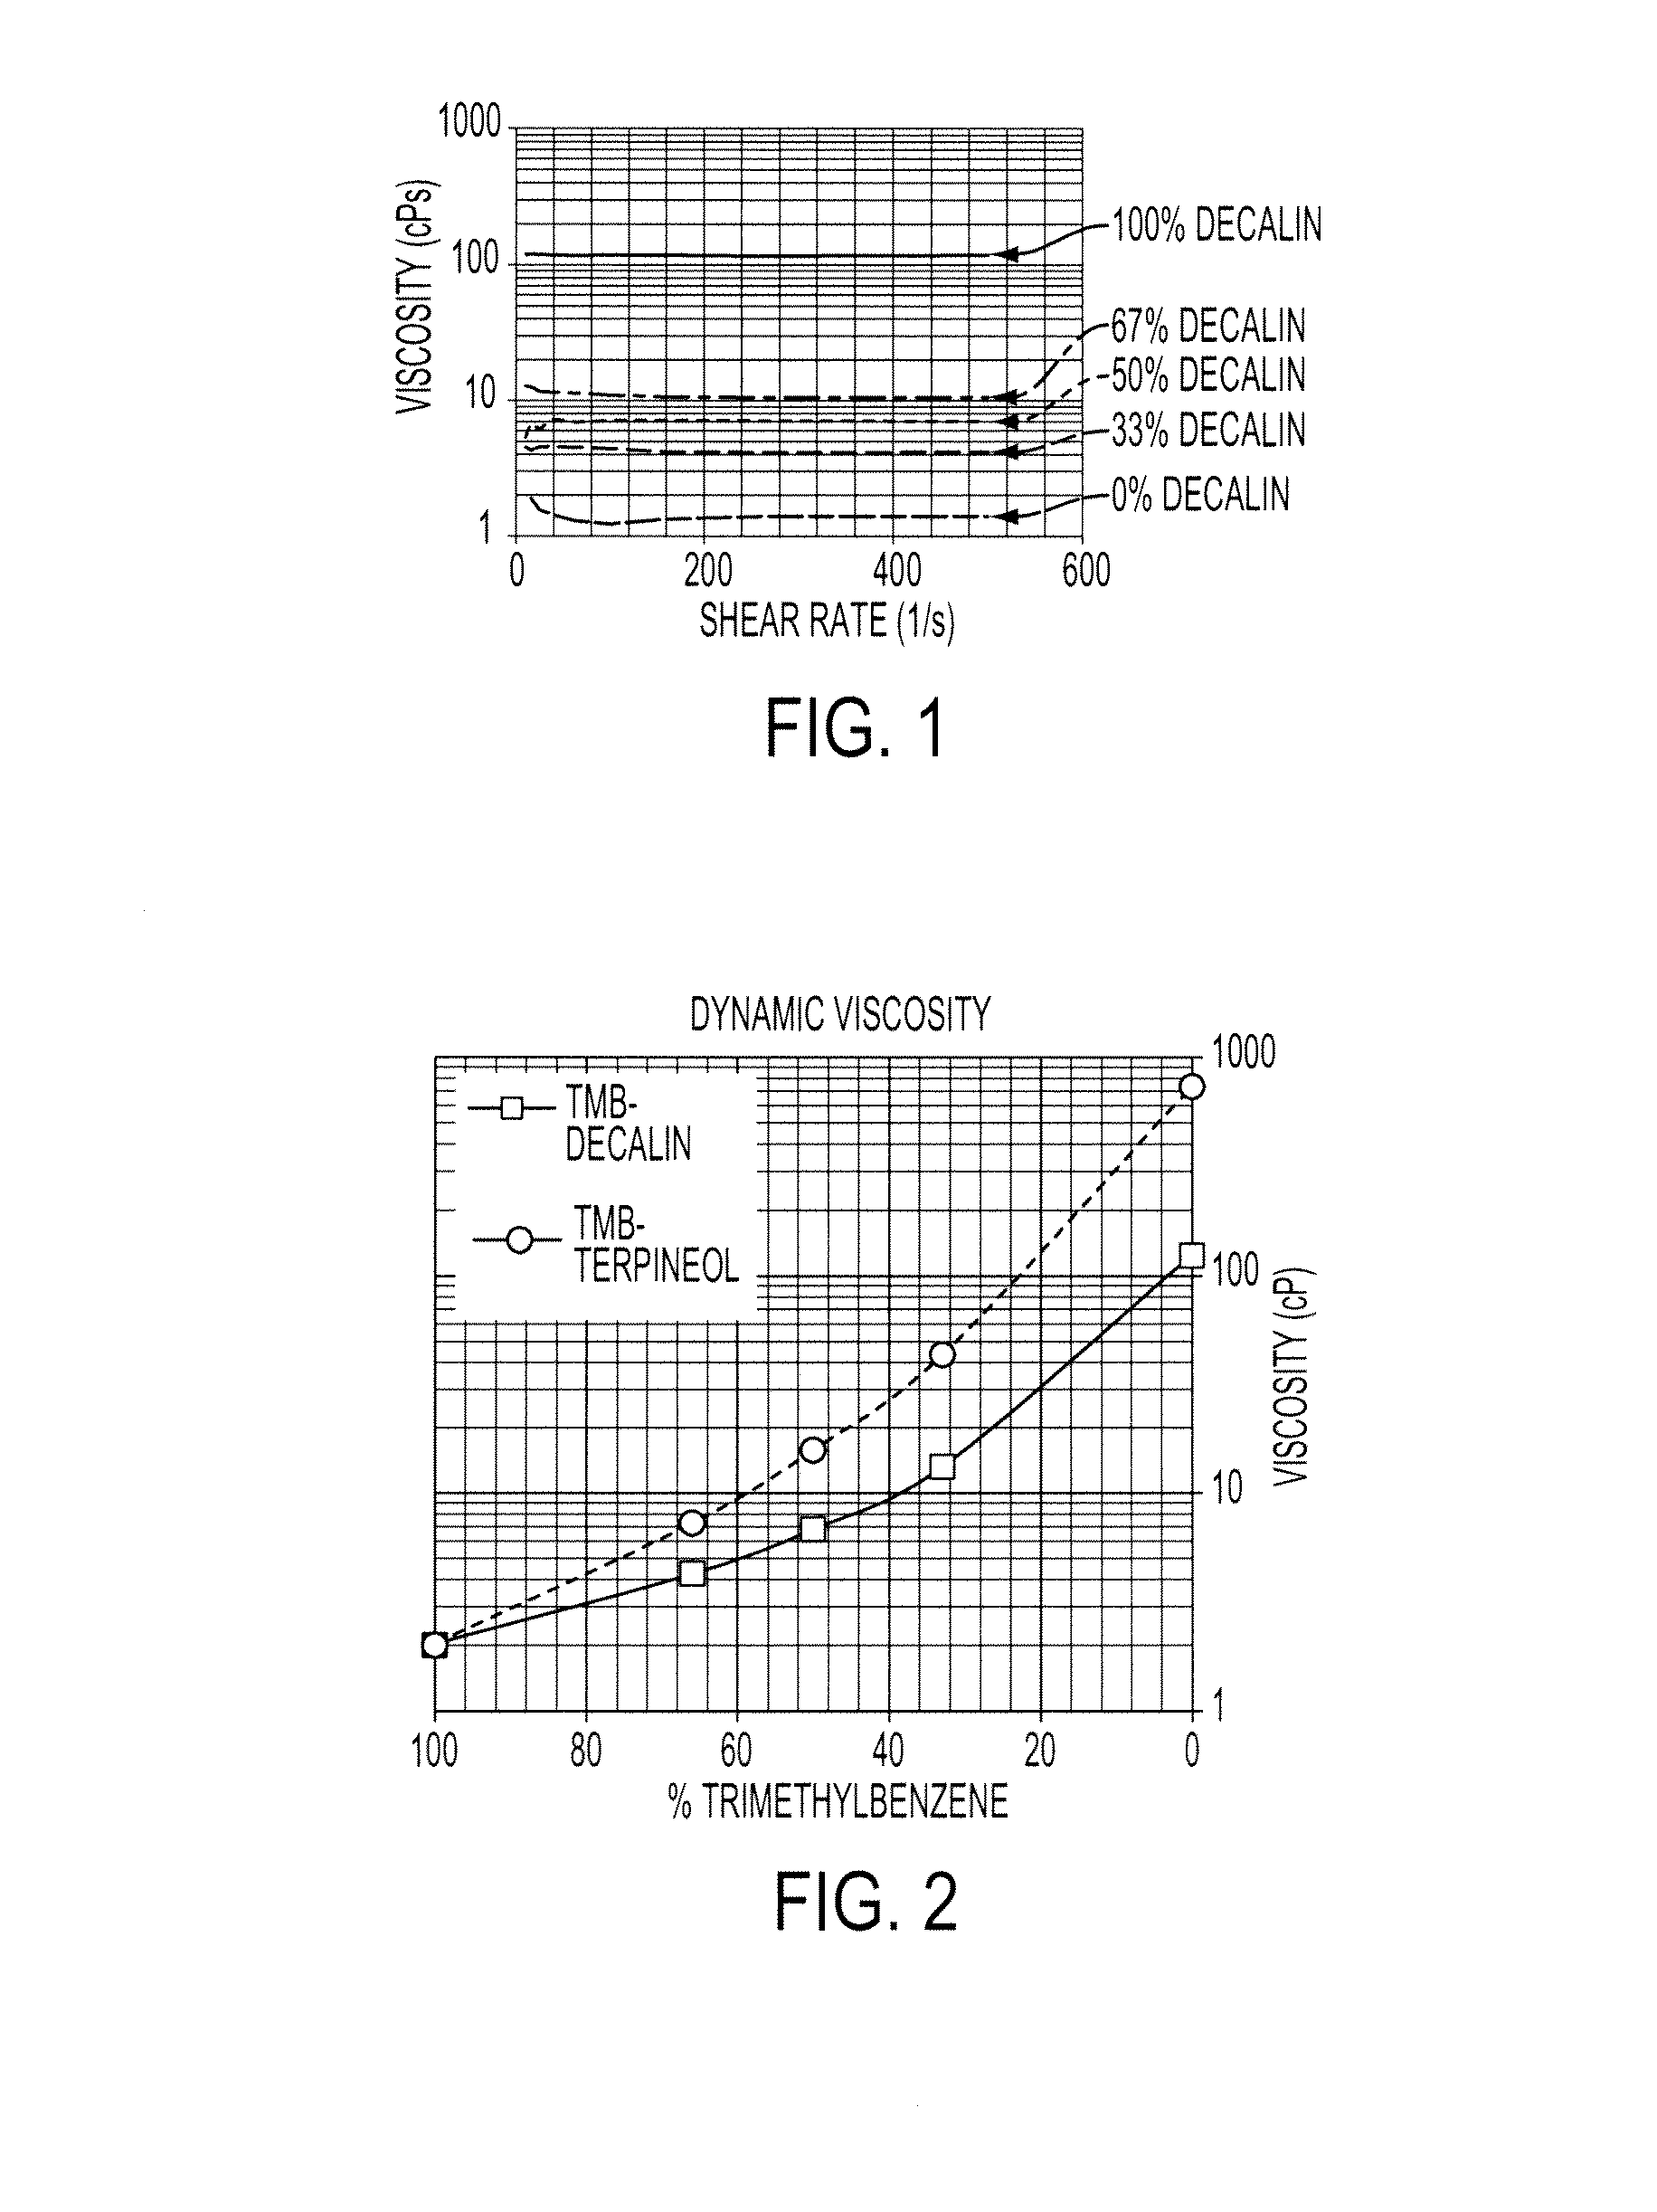 Conductive compositions comprising metal carboxylates